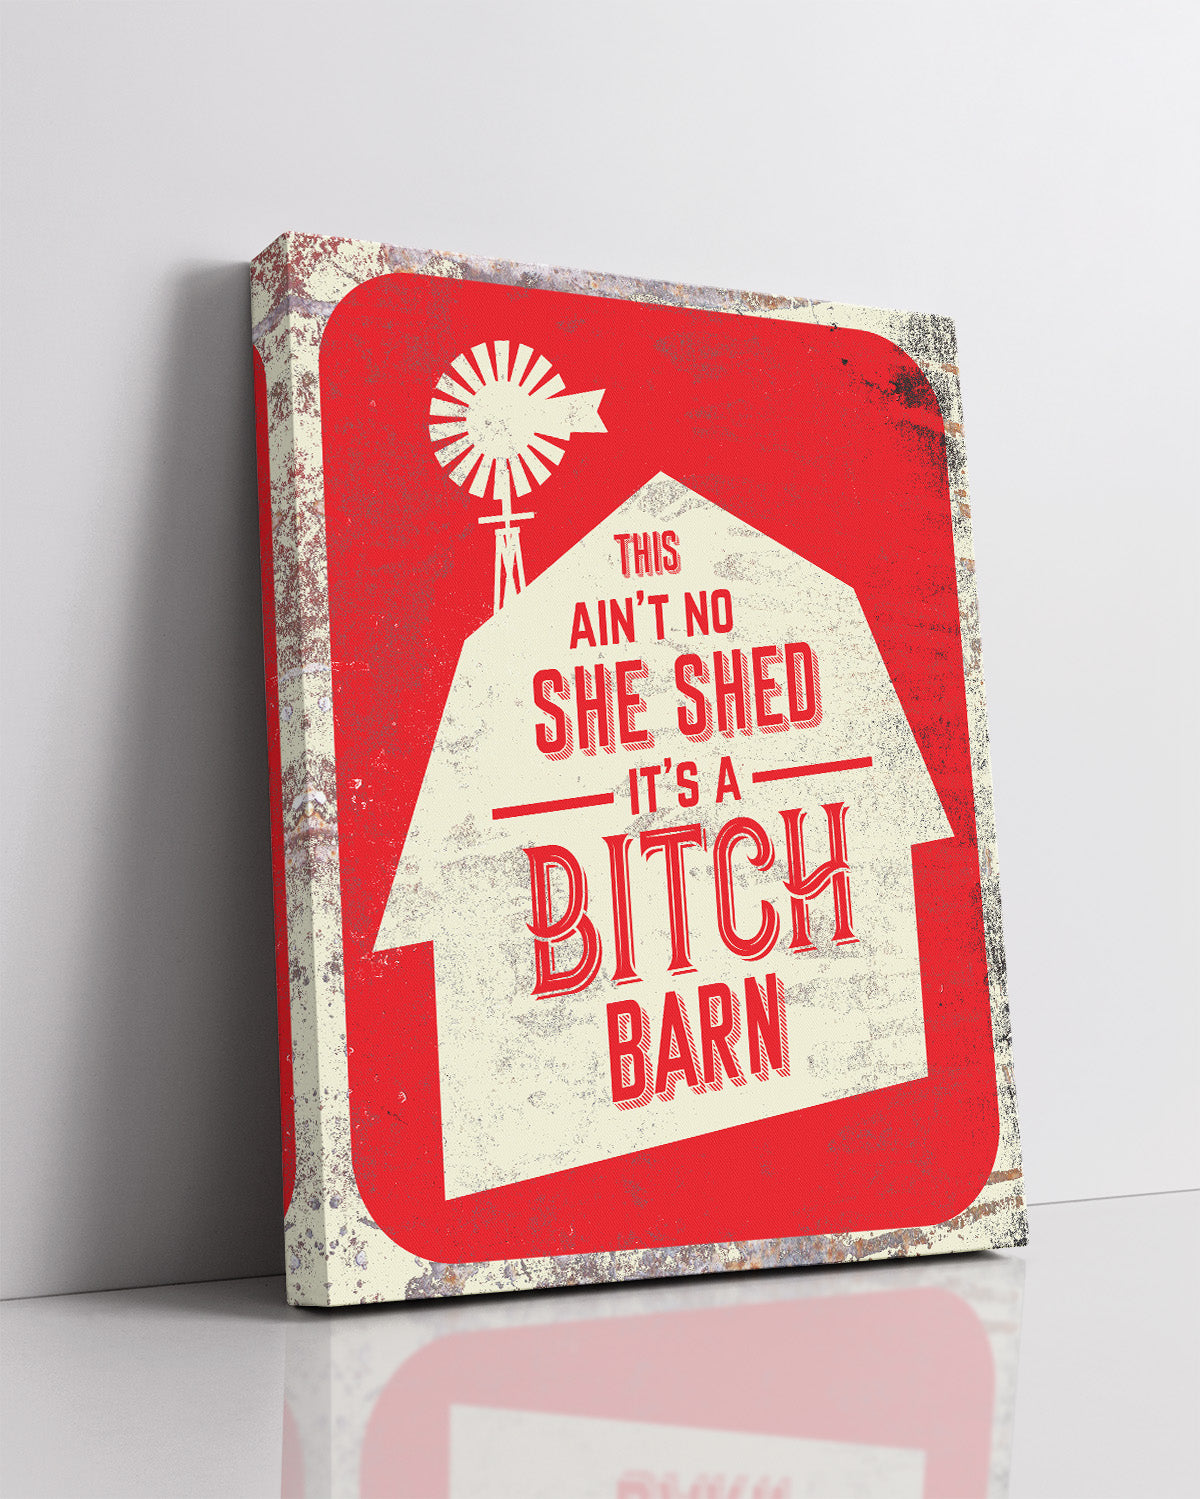 This Ain't No She Shed. It's A Bitch Barn - Wall Decor Art Print with a red background